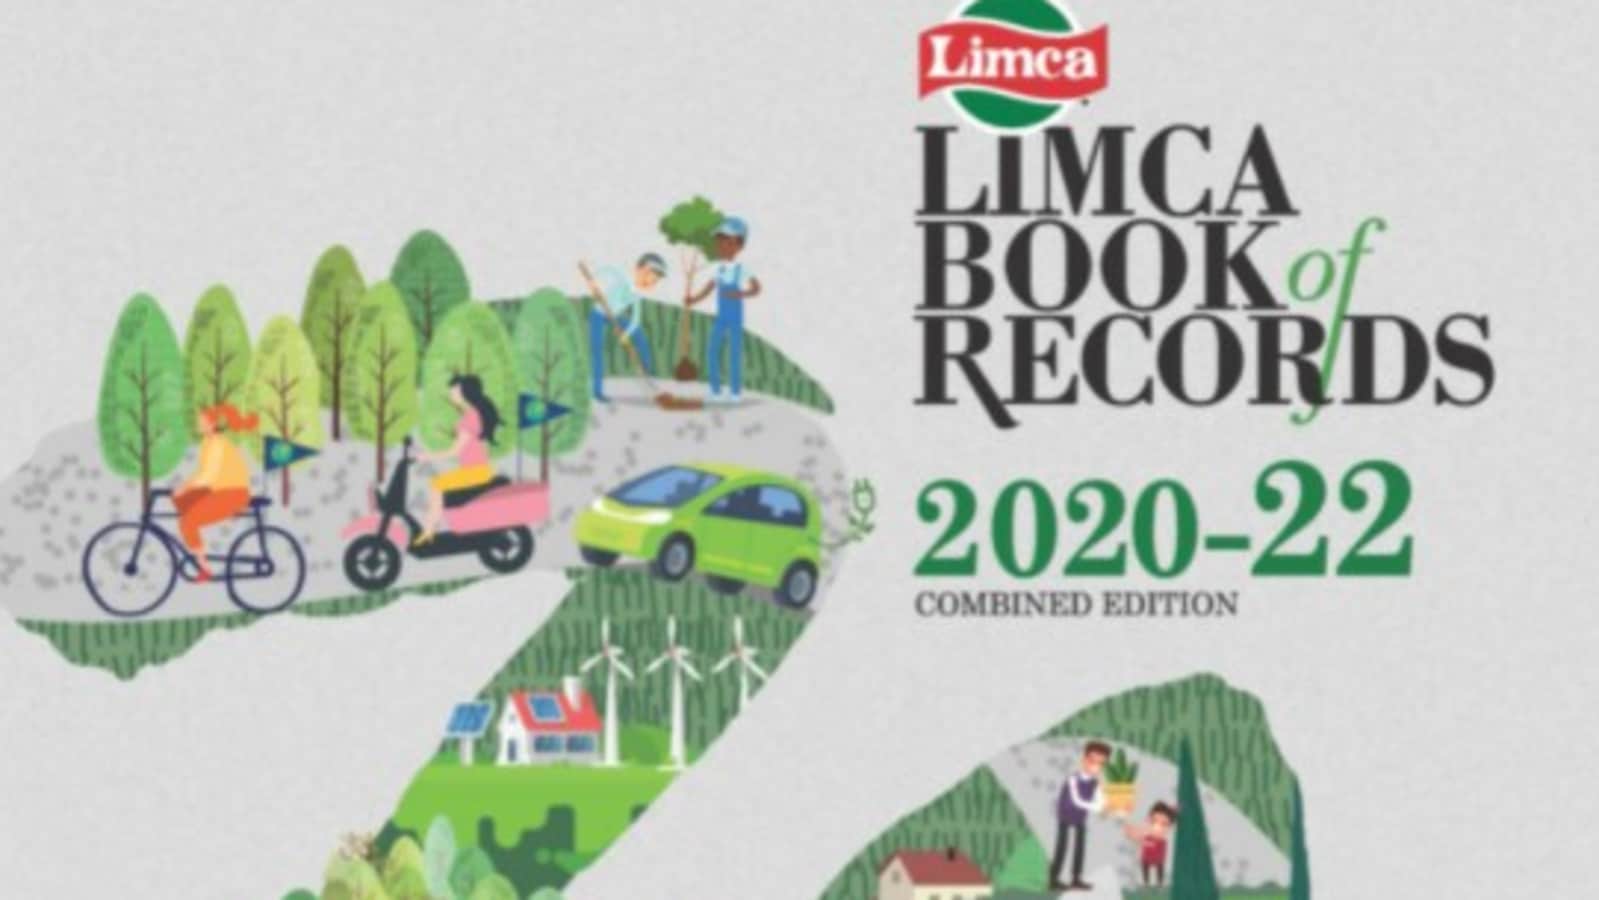 In special edition, Limca Book of Records honours frontline Covid19 workers, innovators